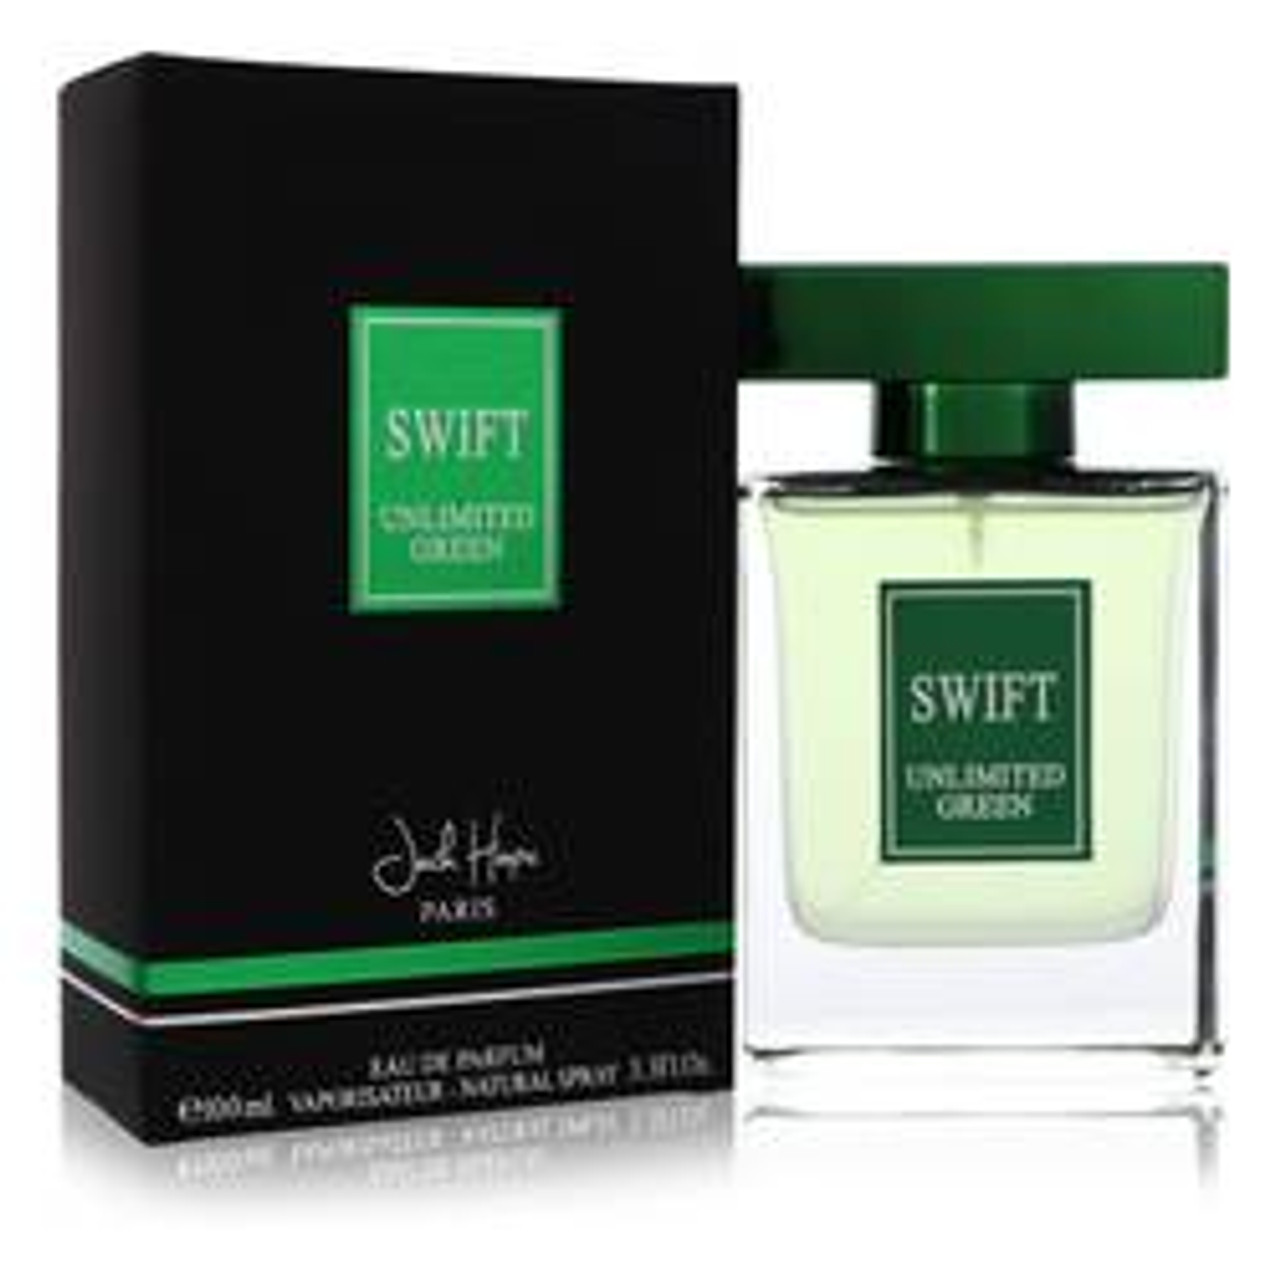 Swift Unlimited Green Cologne By Jack Hope Eau De Parfum Spray 3.3 oz for Men - [From 43.00 - Choose pk Qty ] - *Ships from Miami